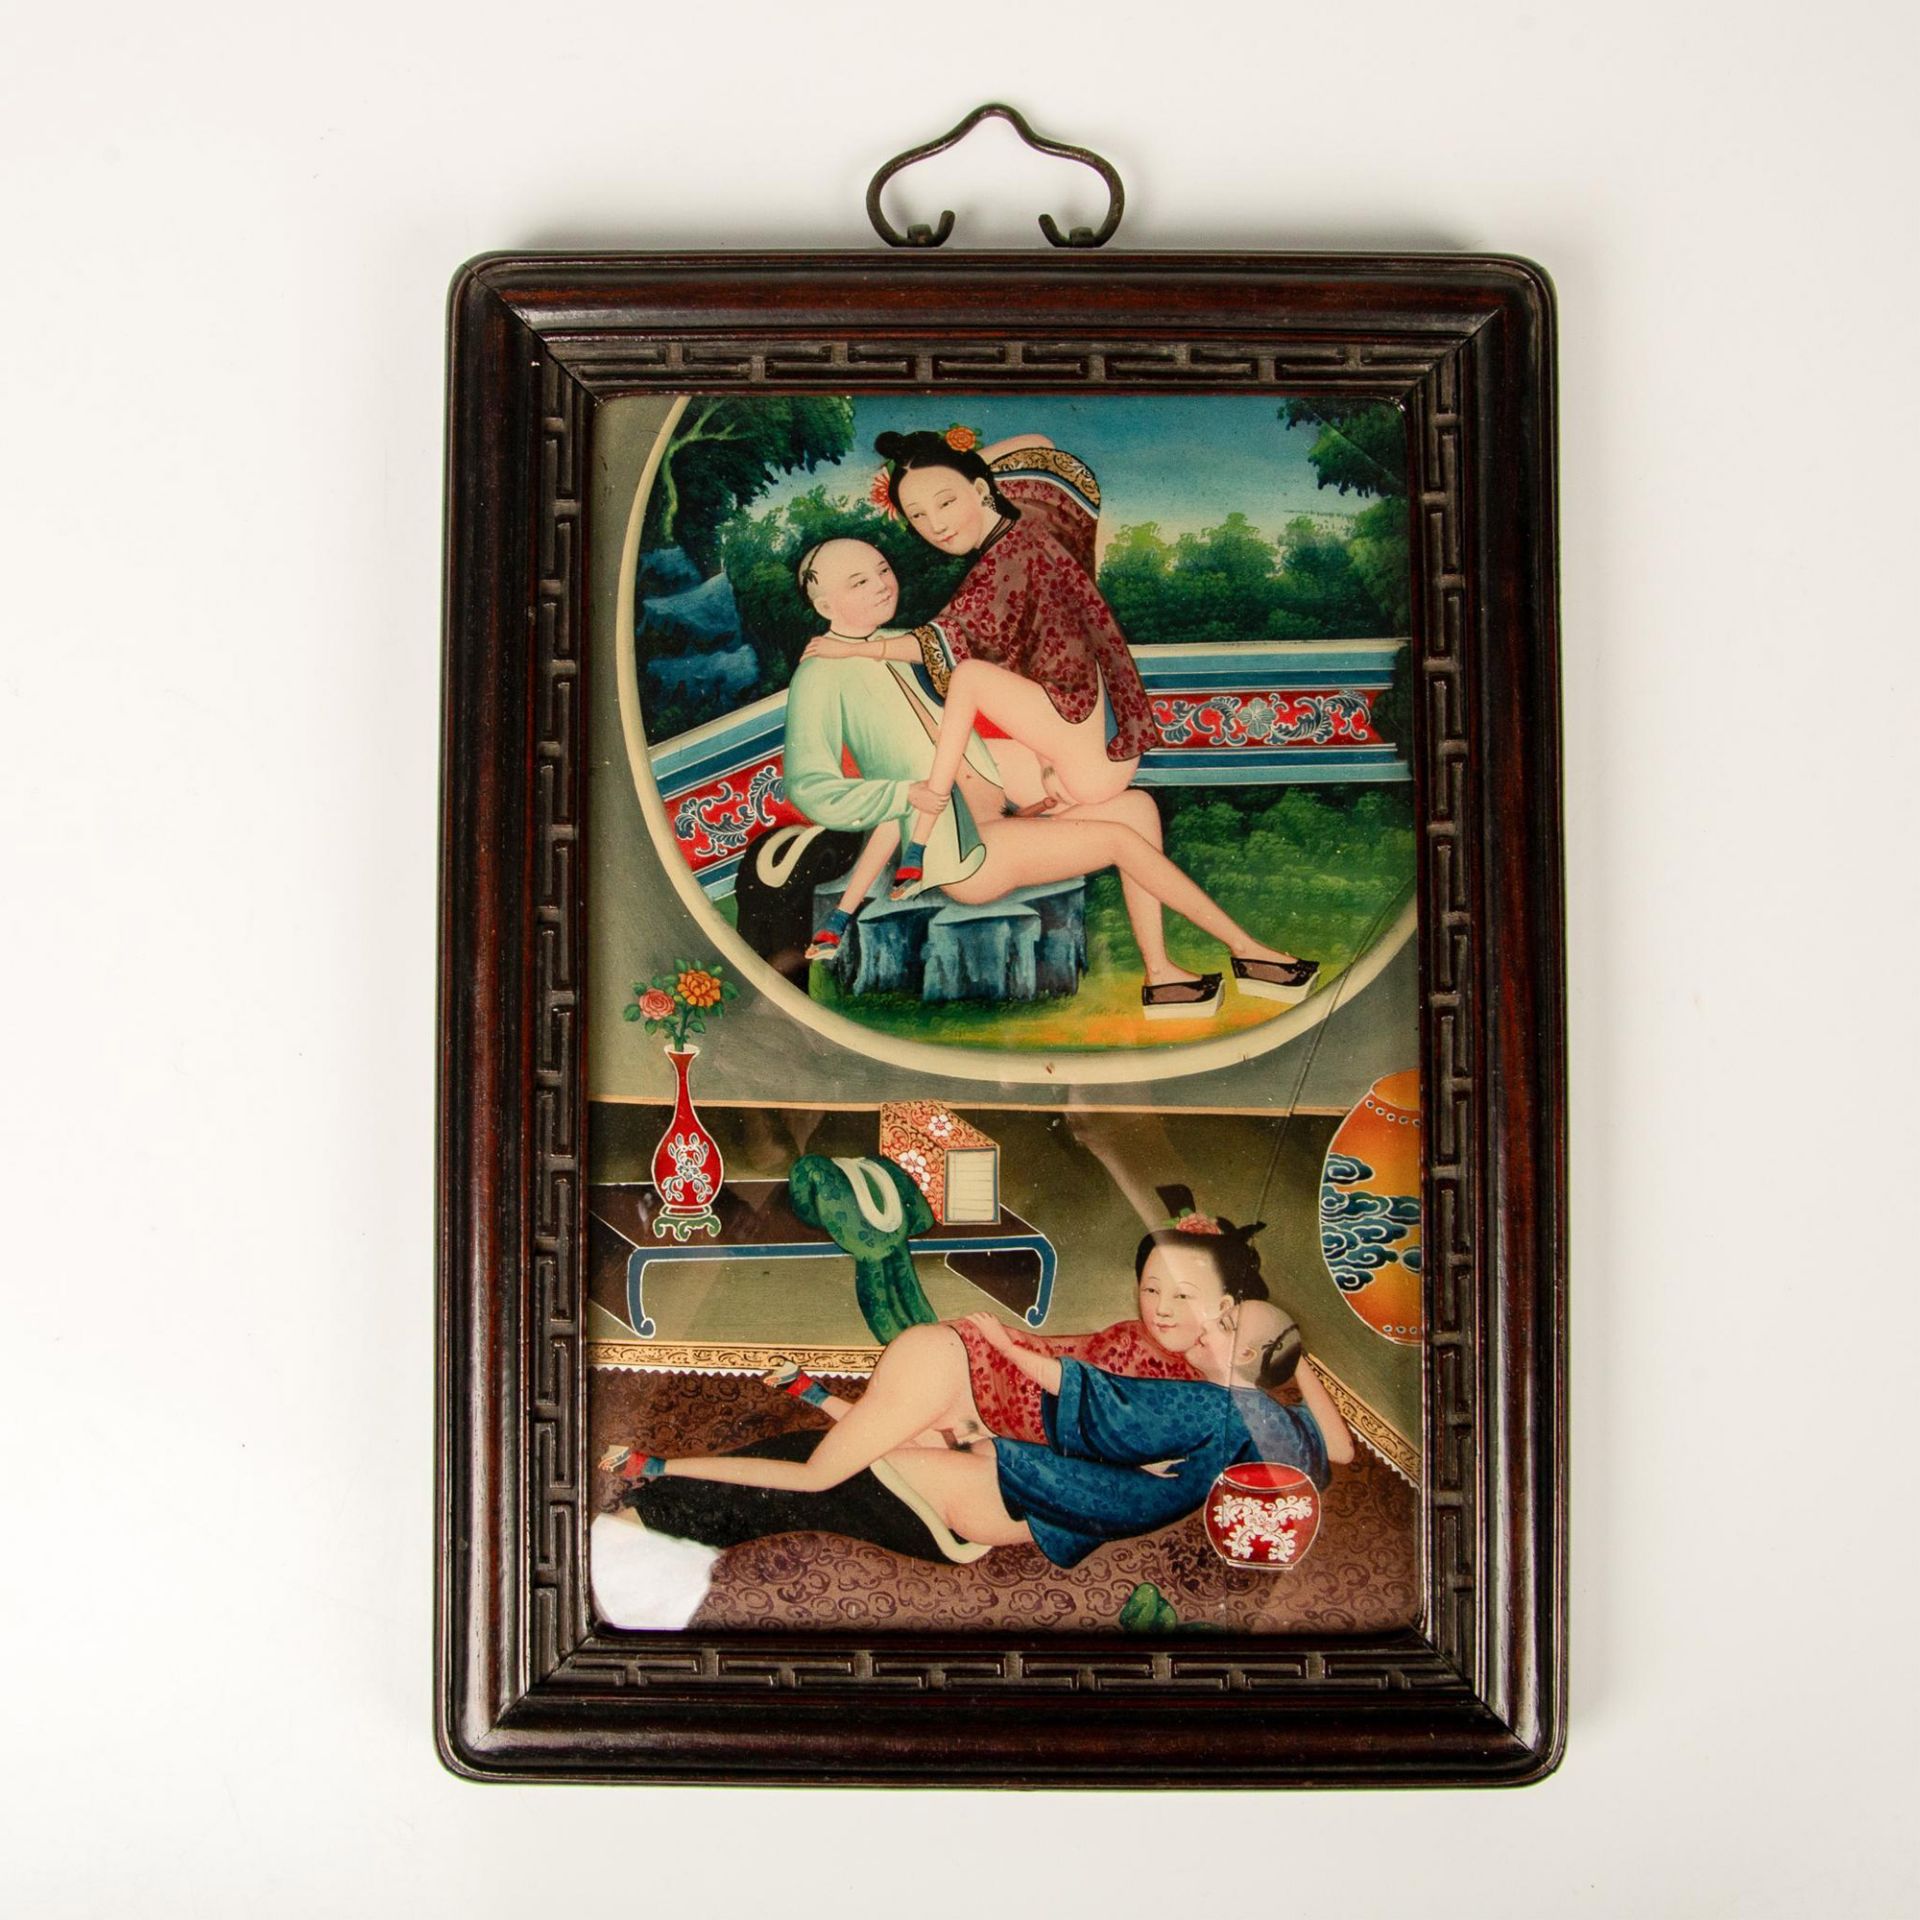 Antique Chinese Erotic Reverse Glass Painting - Image 2 of 4